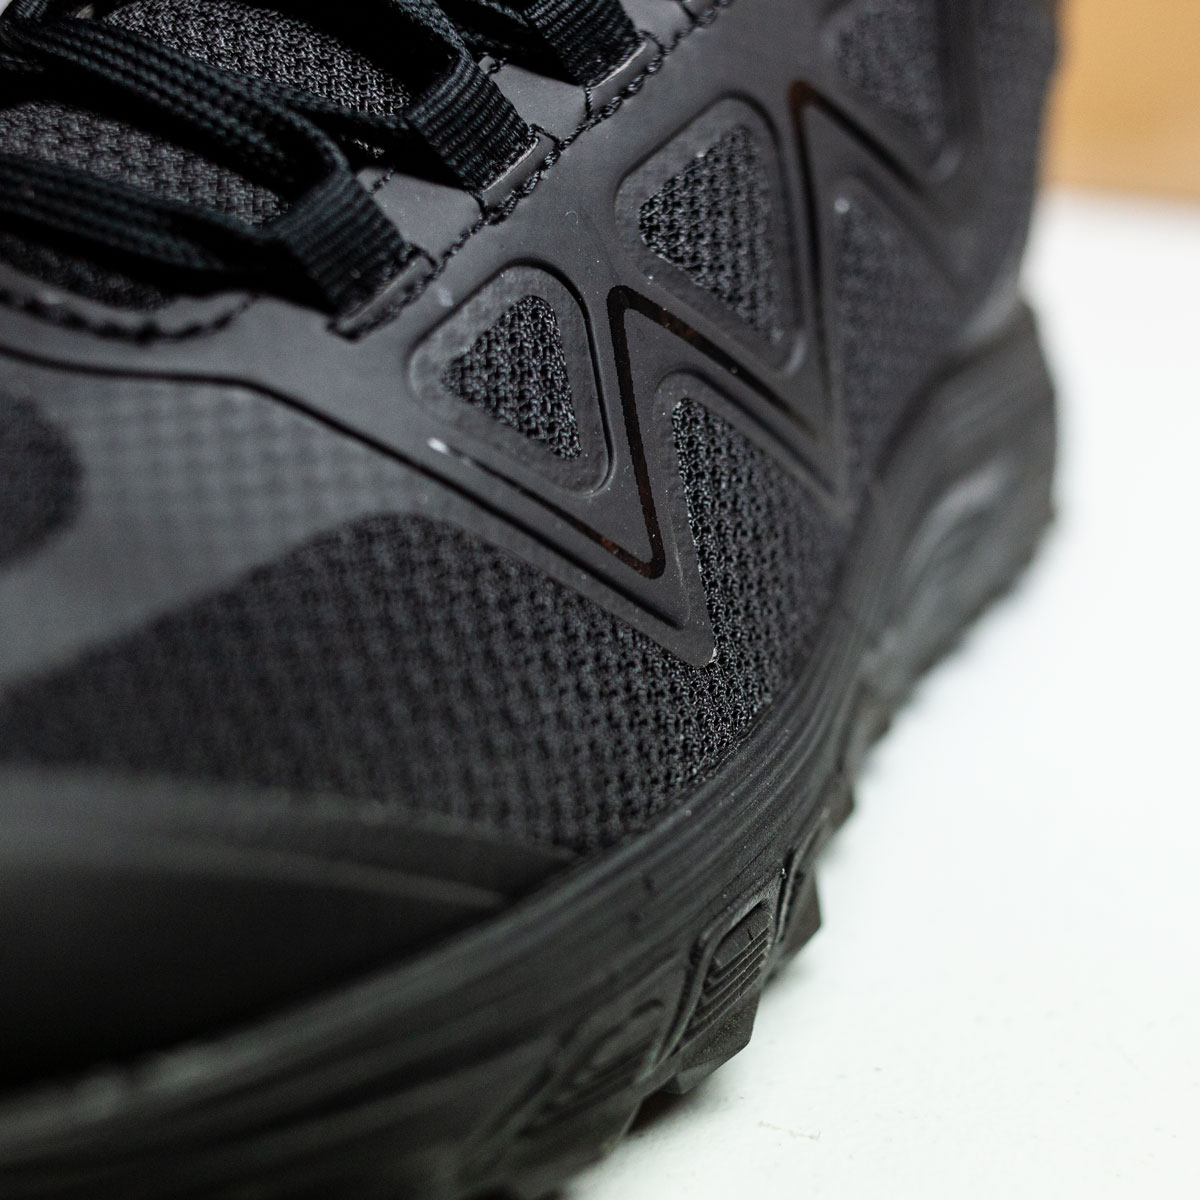 This image of Bates Footwear mid Rush on a white background also uses low angle and shallow depth-of-field to give the subject power and highlight the attractive design of this all black, athletic style running shoe.